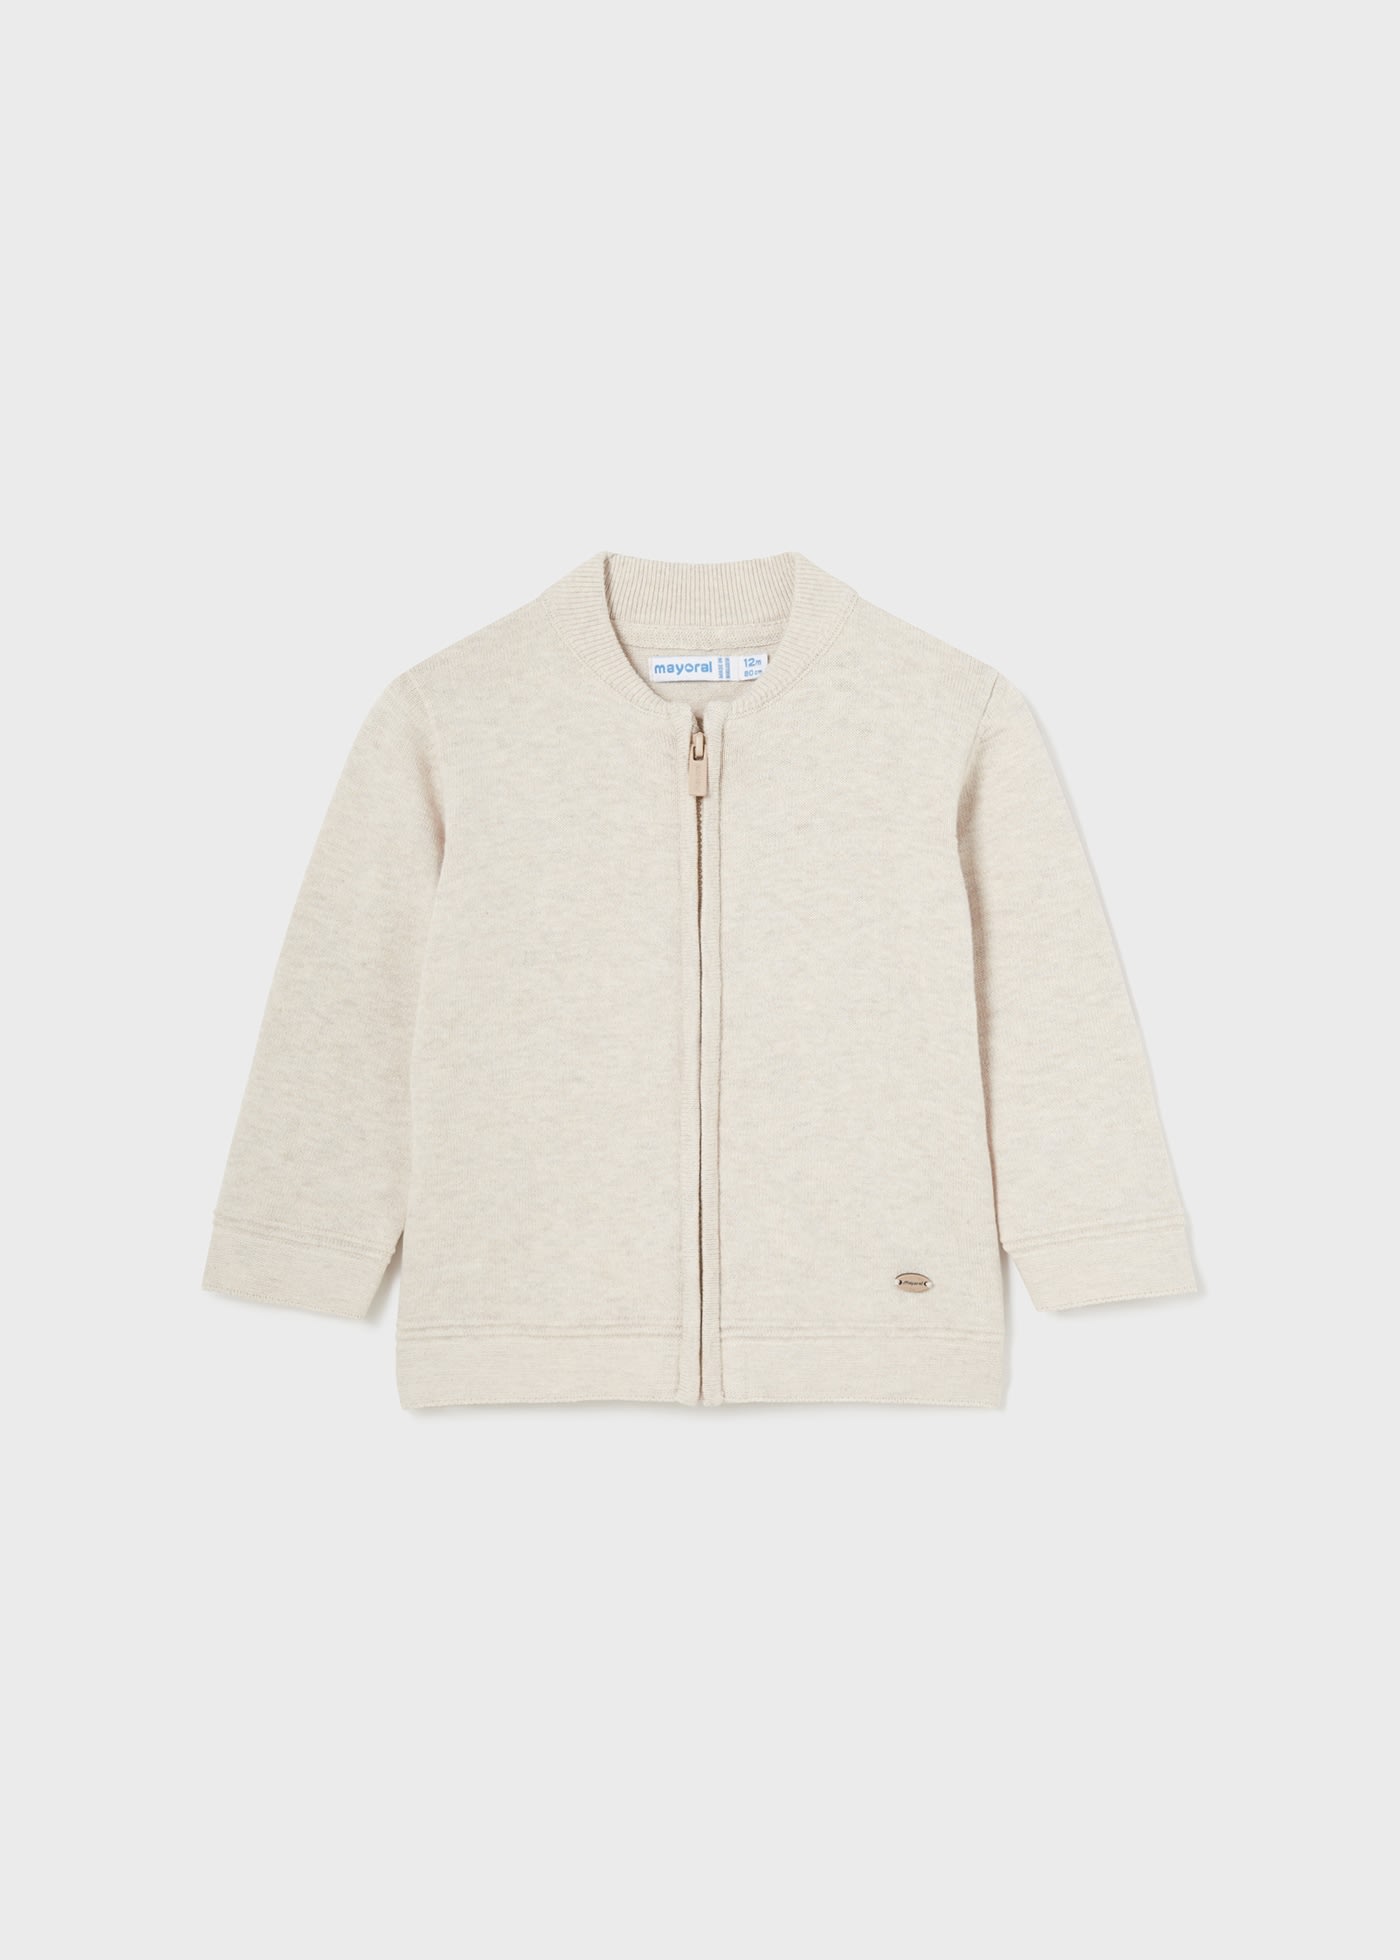 Woven knit jacket baby